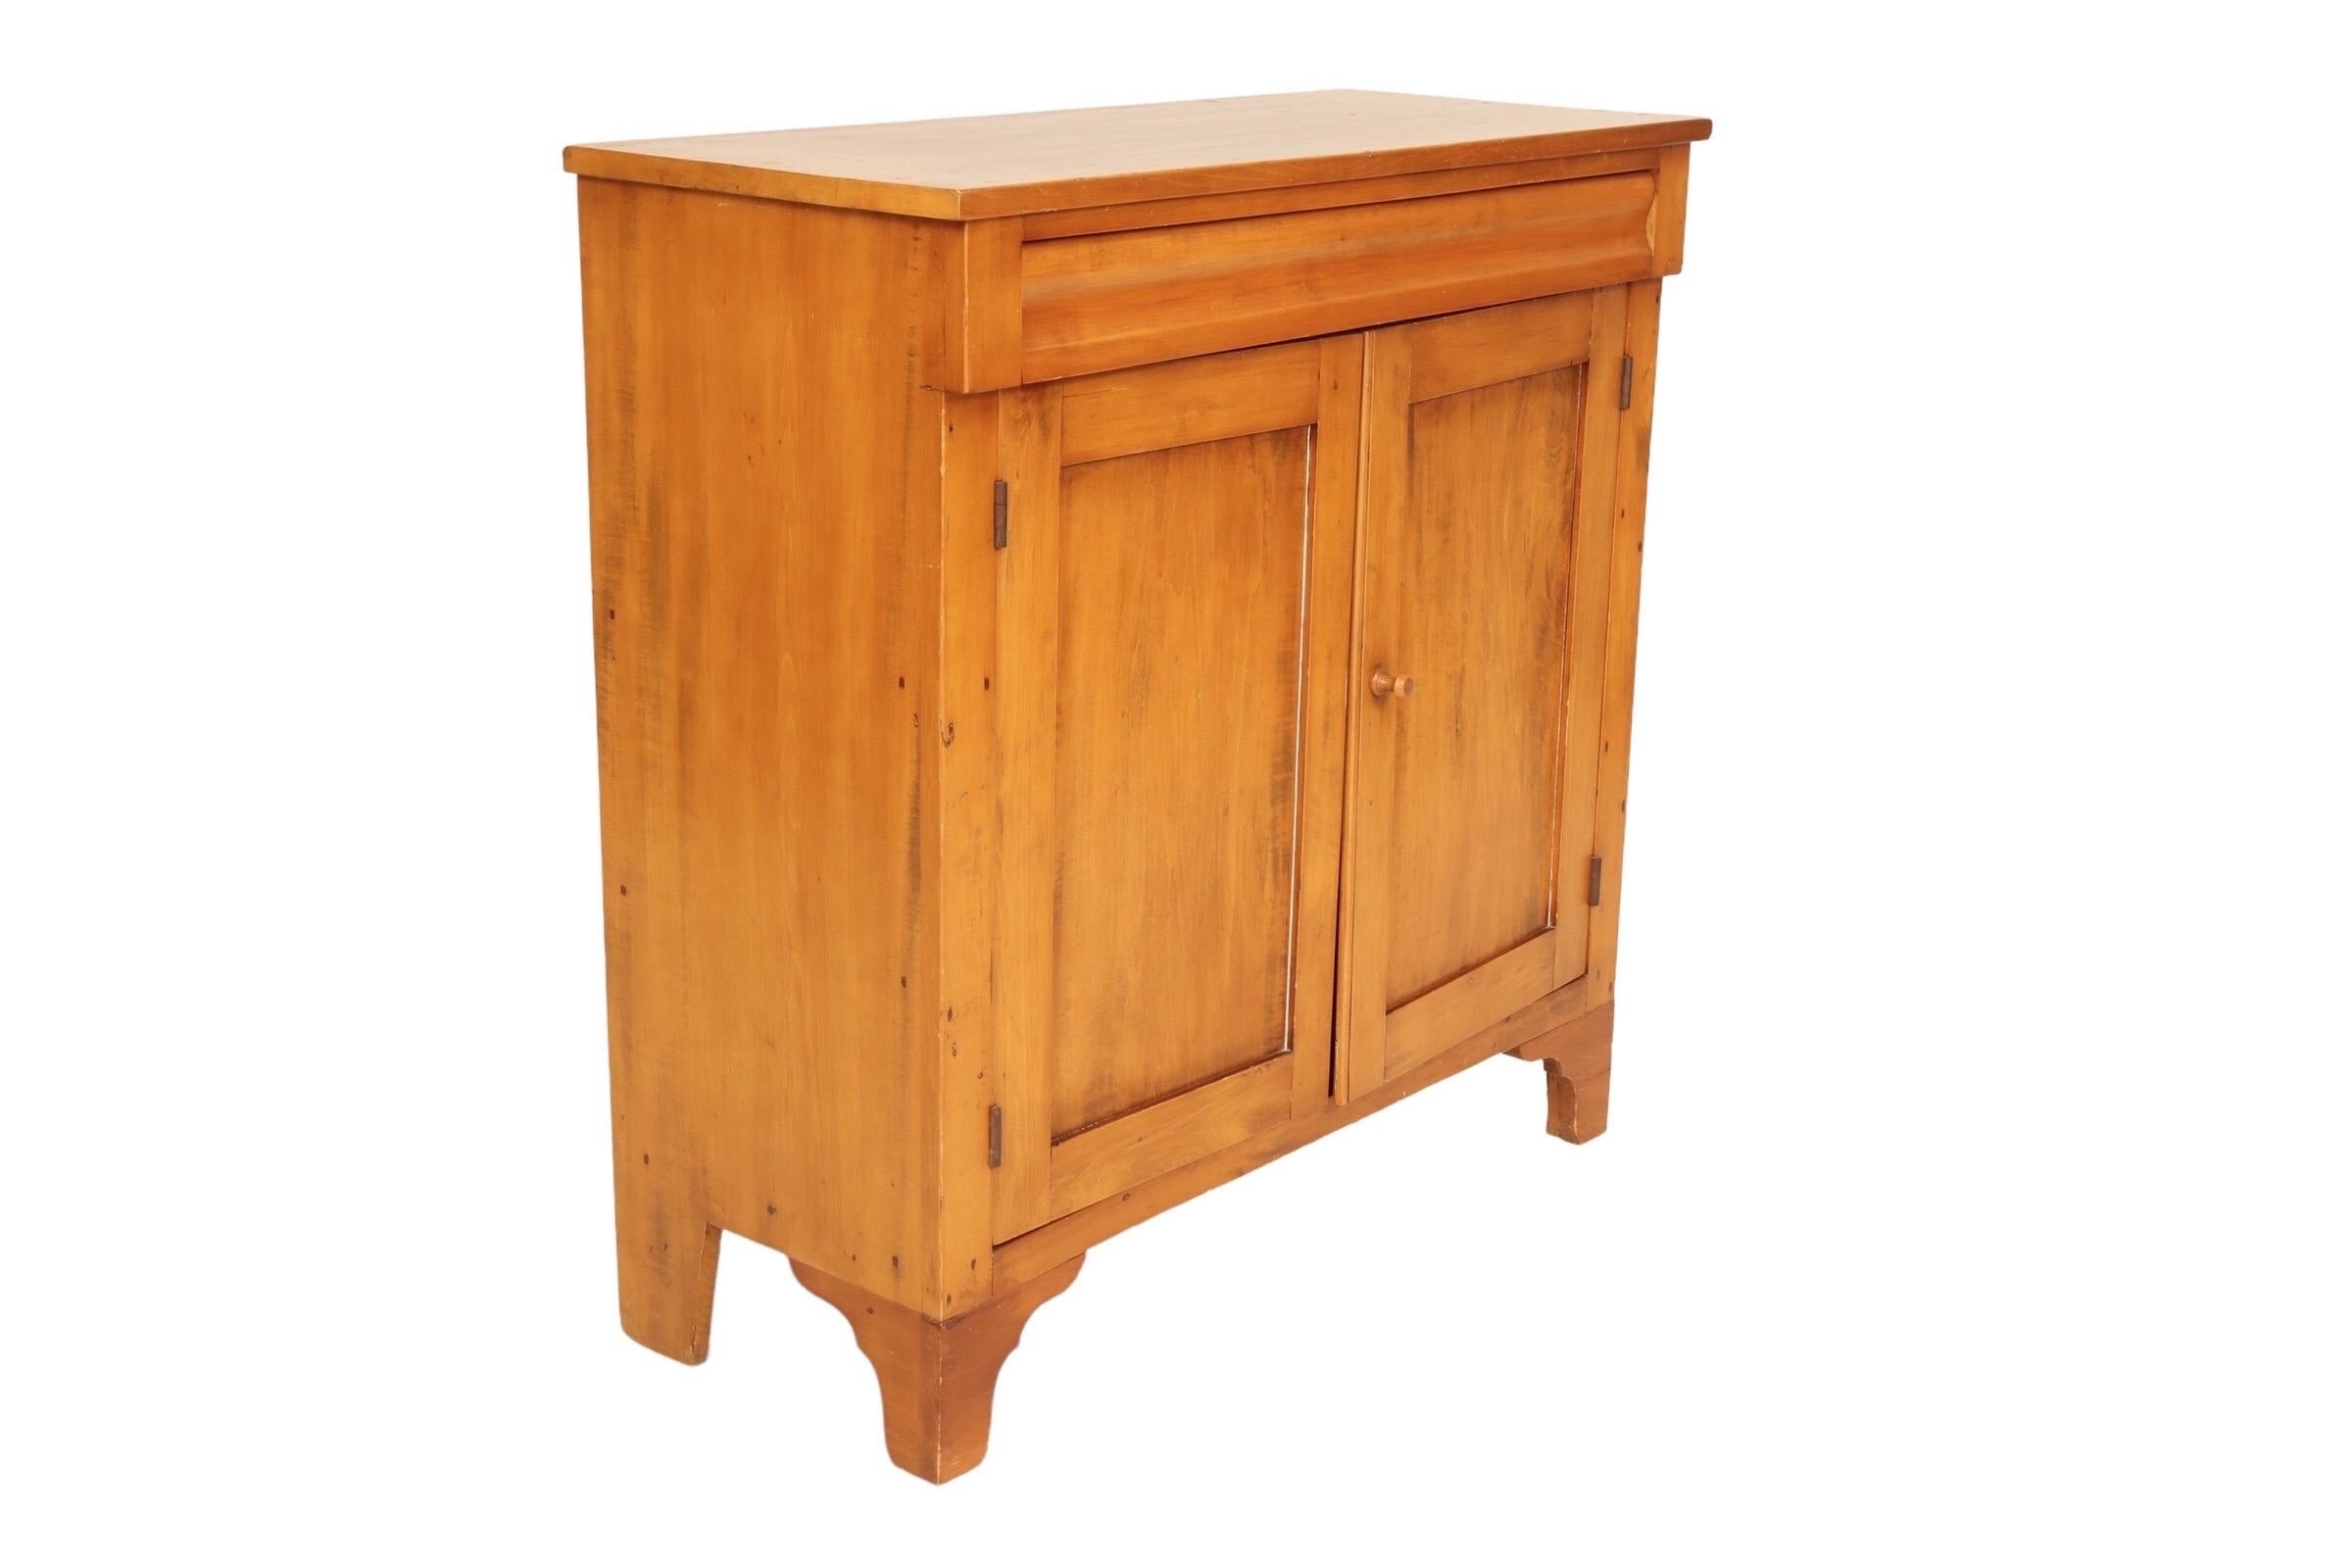 A Shaker style buffet made of cherry wood, dating from the 1860’s. Simple and utilitarian with a single hand dovetailed drawer above cabinet doors that house two shelves. The drawer pulls open from underneath with an undulating beveled drawer front.